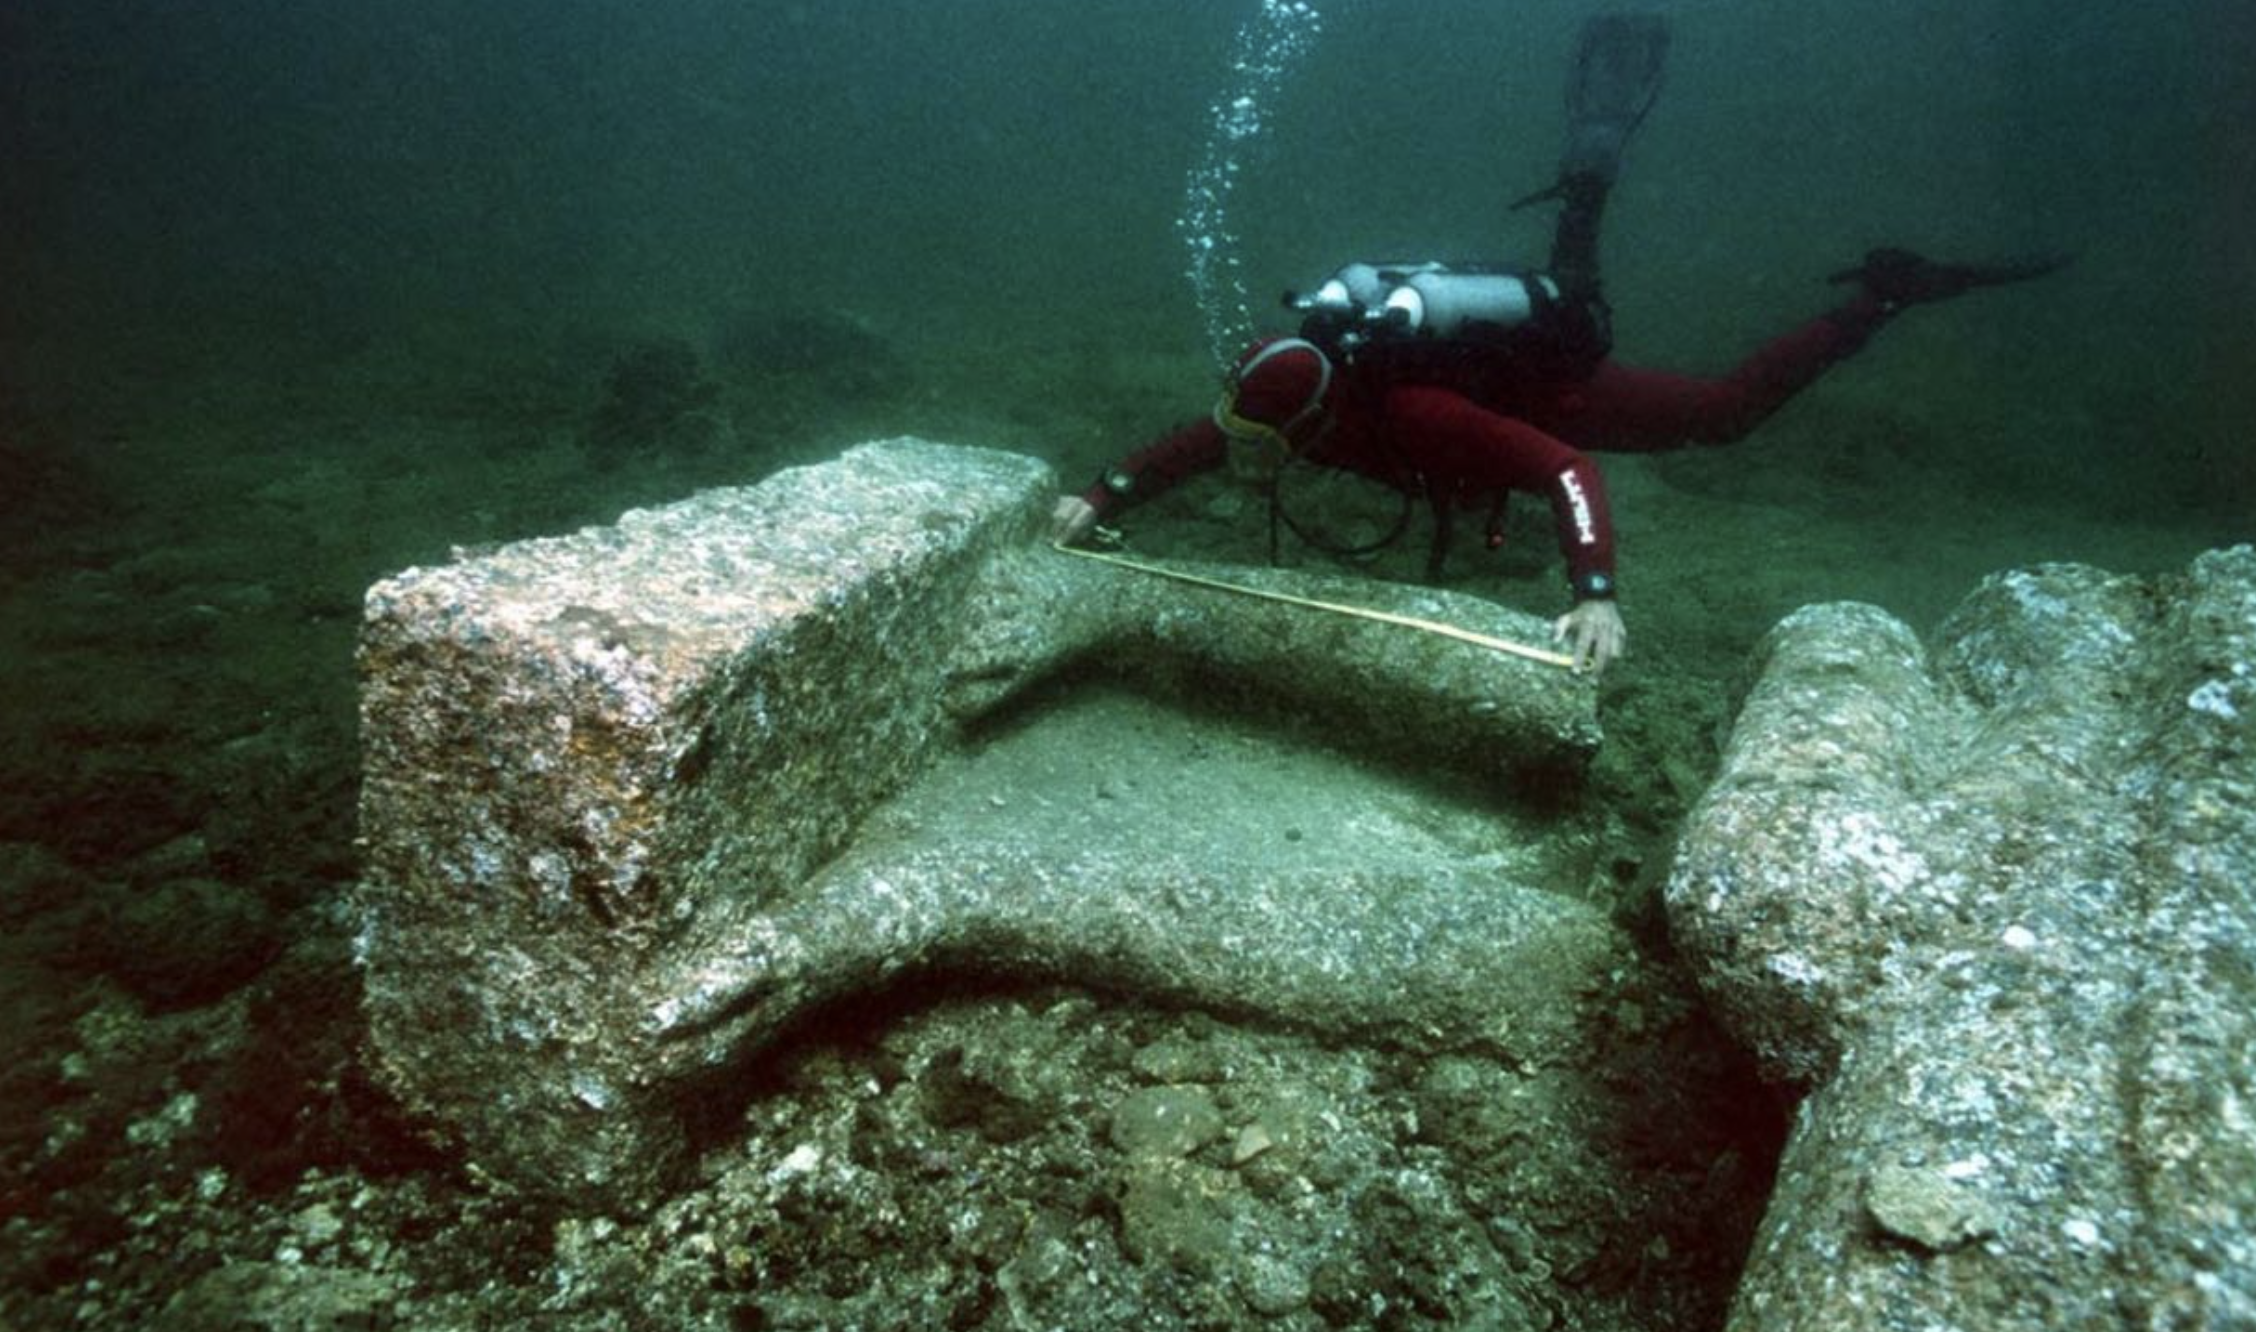 At Thonis-Heracleion in the Bay of Aboukir, an archaeologist carefully measures the feet and other fragments of a massive statue. These measurements are taken after the initial cleaning process conducted on-site. Image Credit: Franck Goddio/Hilti Foundation, photo: Christoph Gerigk.